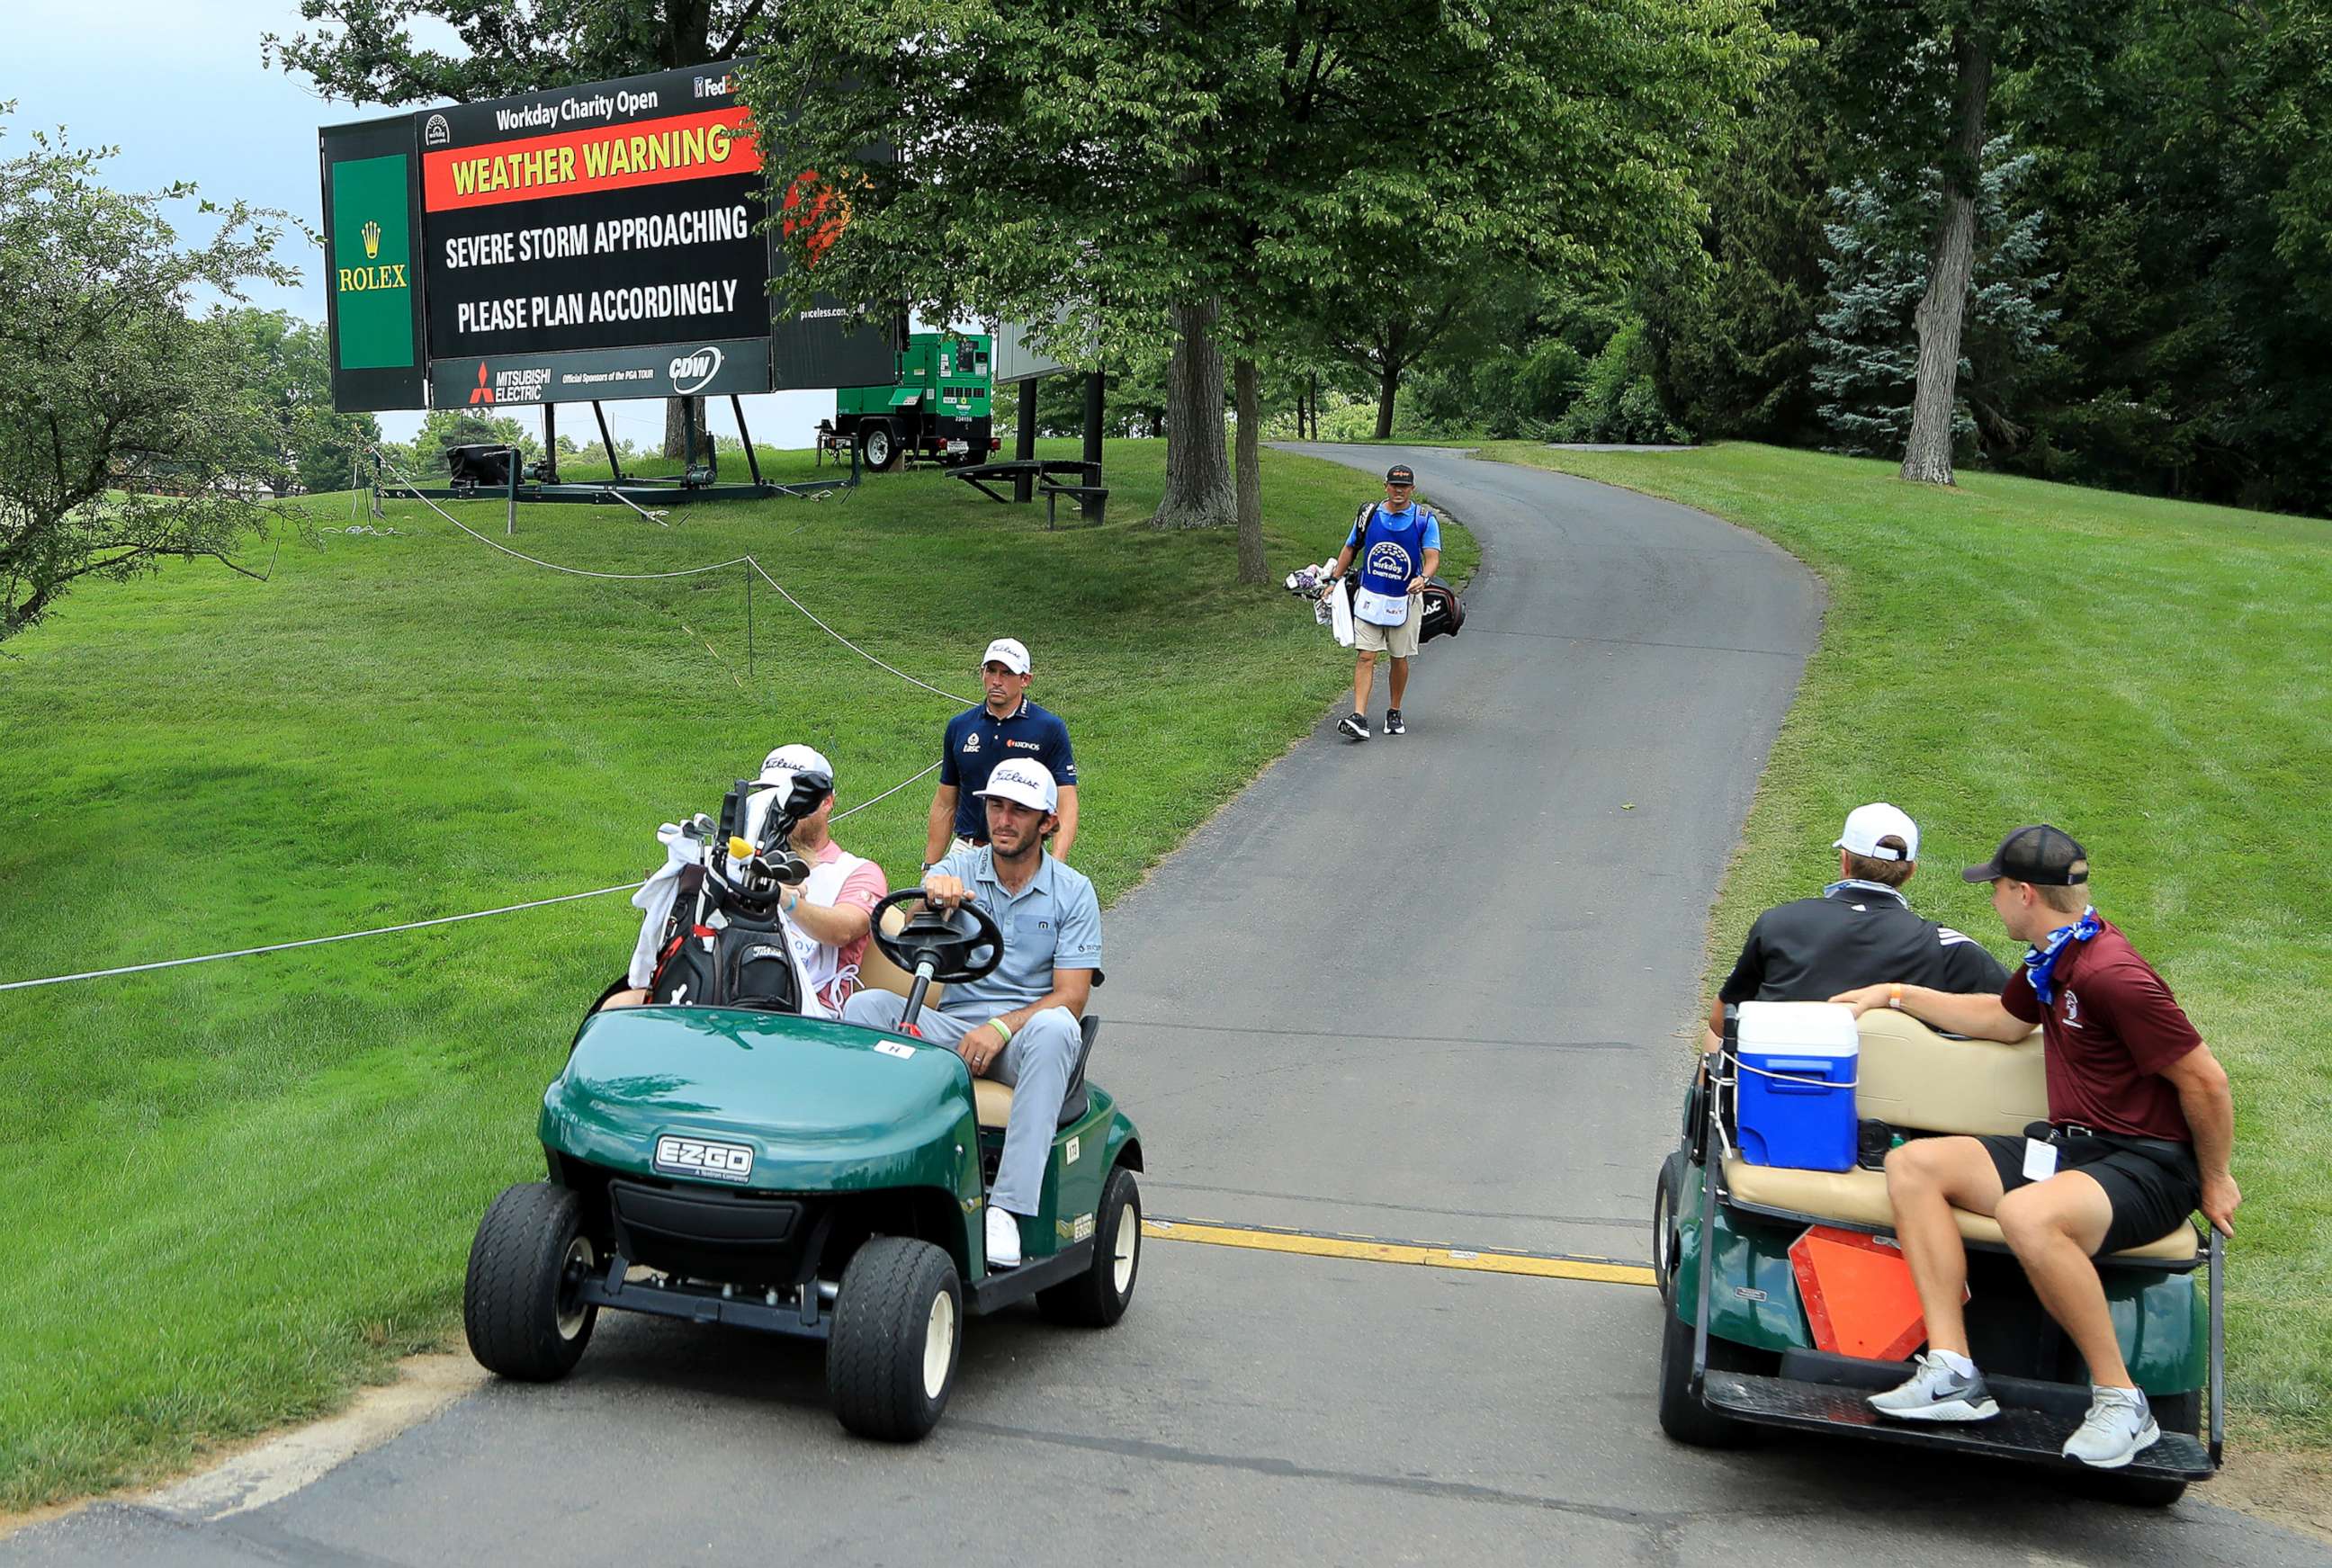 PHOTO: Max Homa and his caddie ride in a cart during a delay due to inclement weather during the second round of the Workday Charity Open on July 10, 2020, at Muirfield Village Golf Club in Dublin, Ohio.